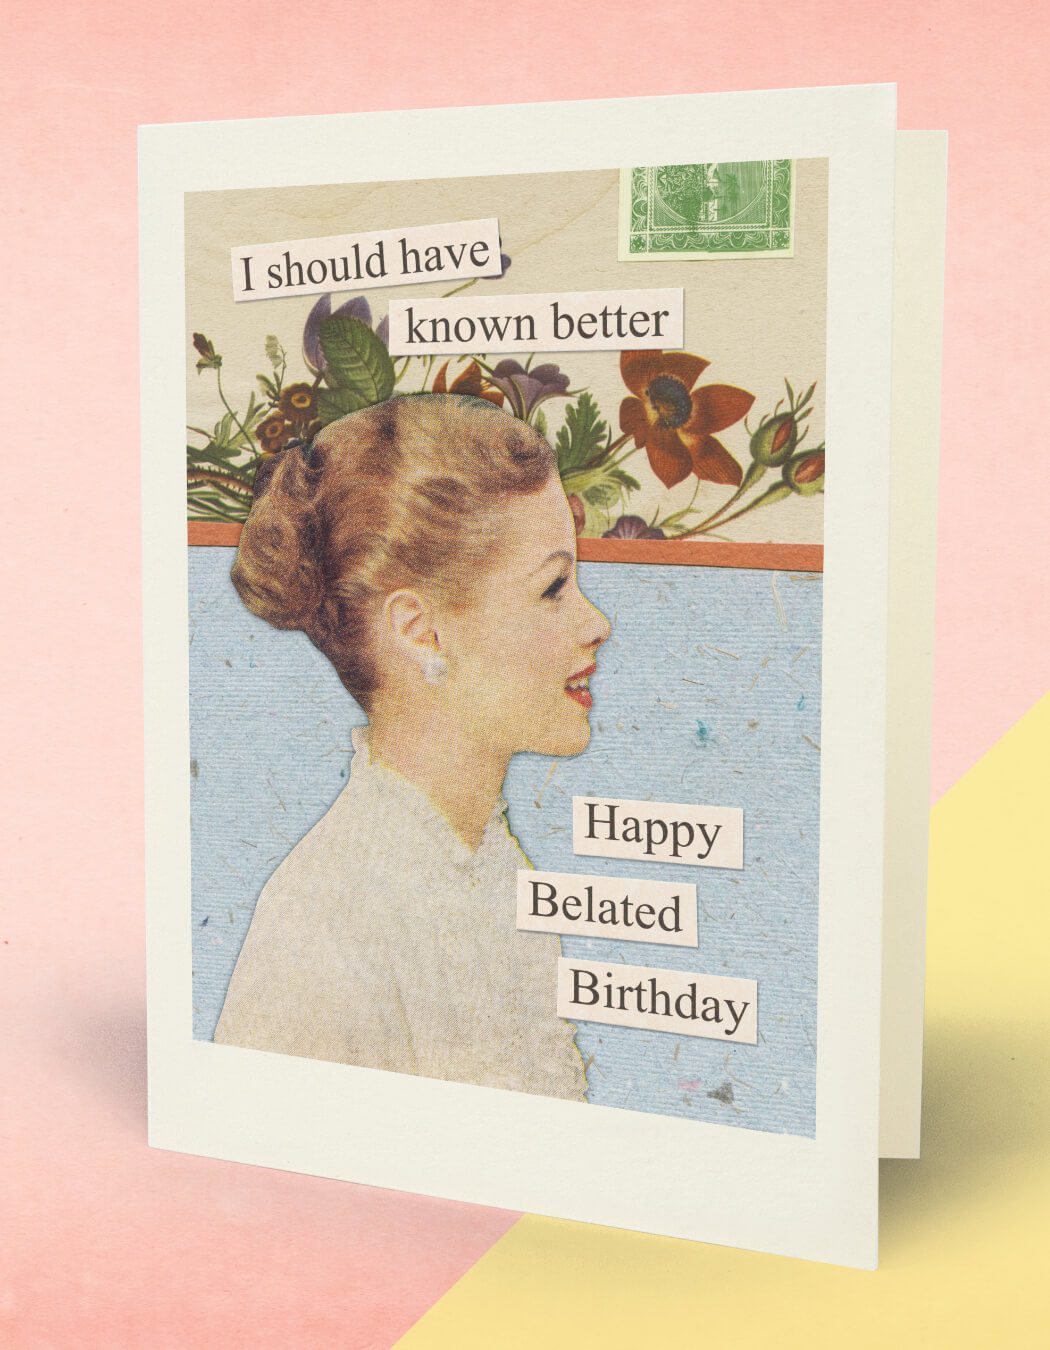 Cover image of greeting card, "Known Better"